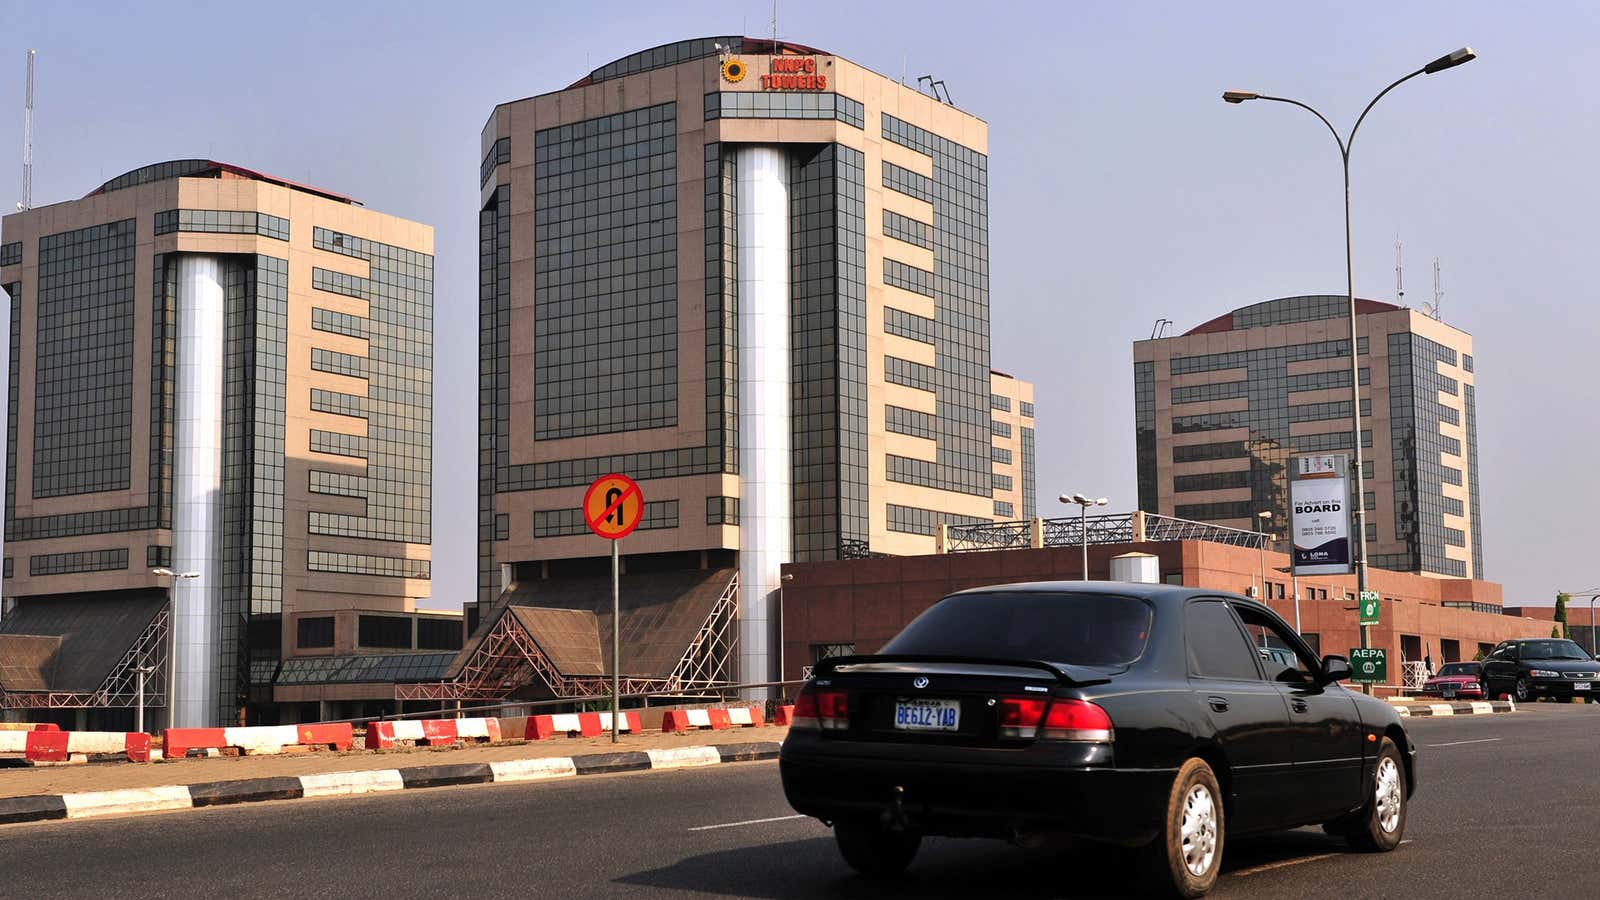 Nigerian National Petroleum Corporation offices in Abuja